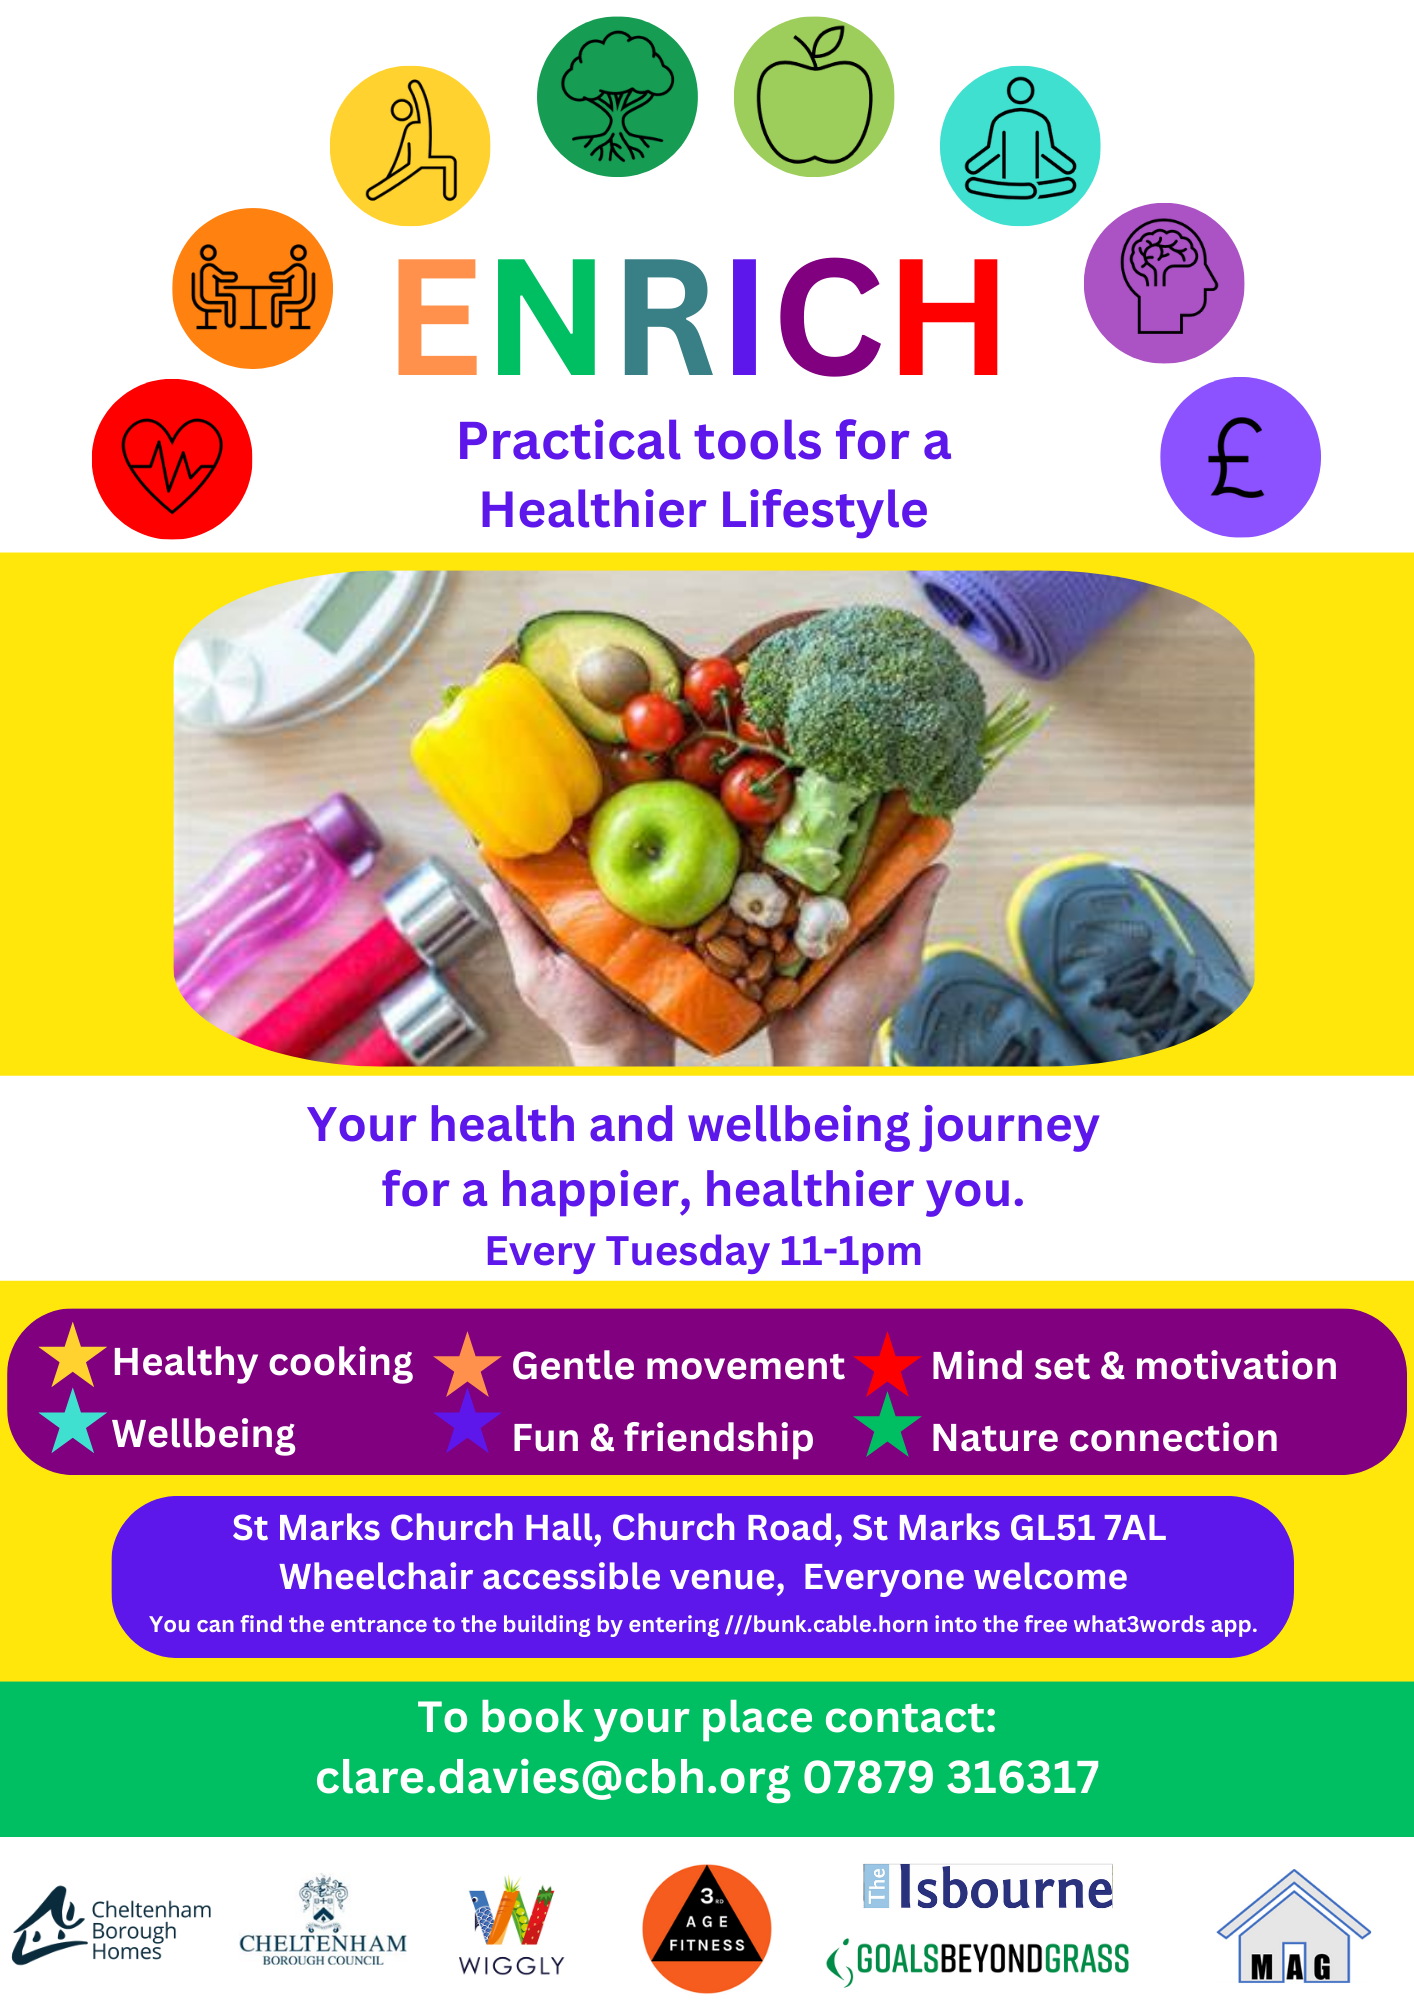 Enrich health and wellbeing poster practical tools for a healthier lifestyle covers healthy cooking eating, gentle movement, friendship, wellbeing